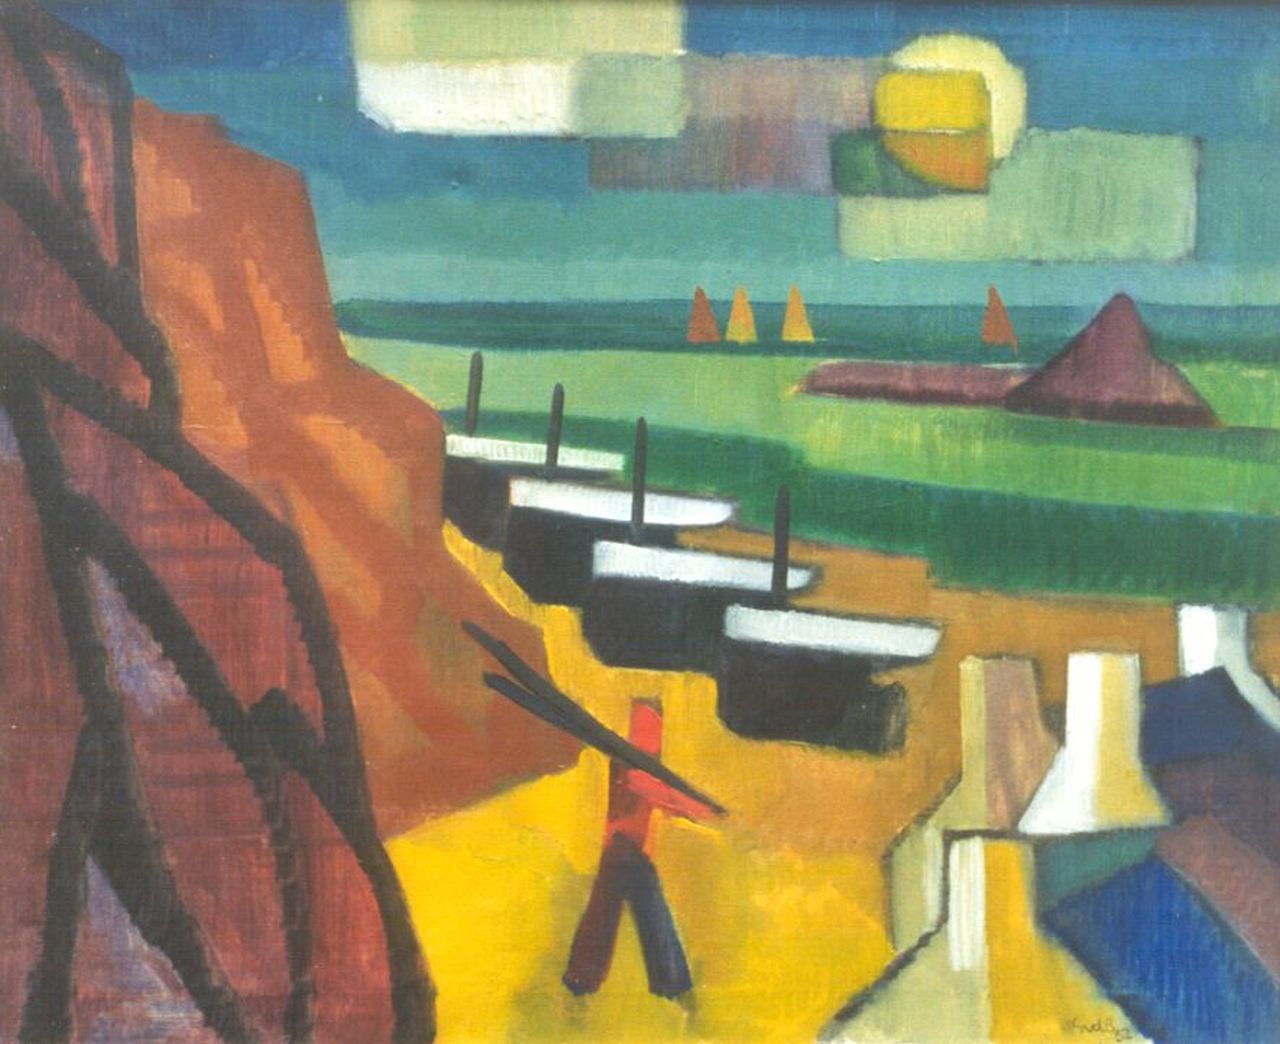 Berg S.R. van den | Sybren Ridsert 'Siep' van den Berg, Fishing boats on the beach, South France, oil on canvas 64.8 x 80.0 cm, signed l.r. and dated '52